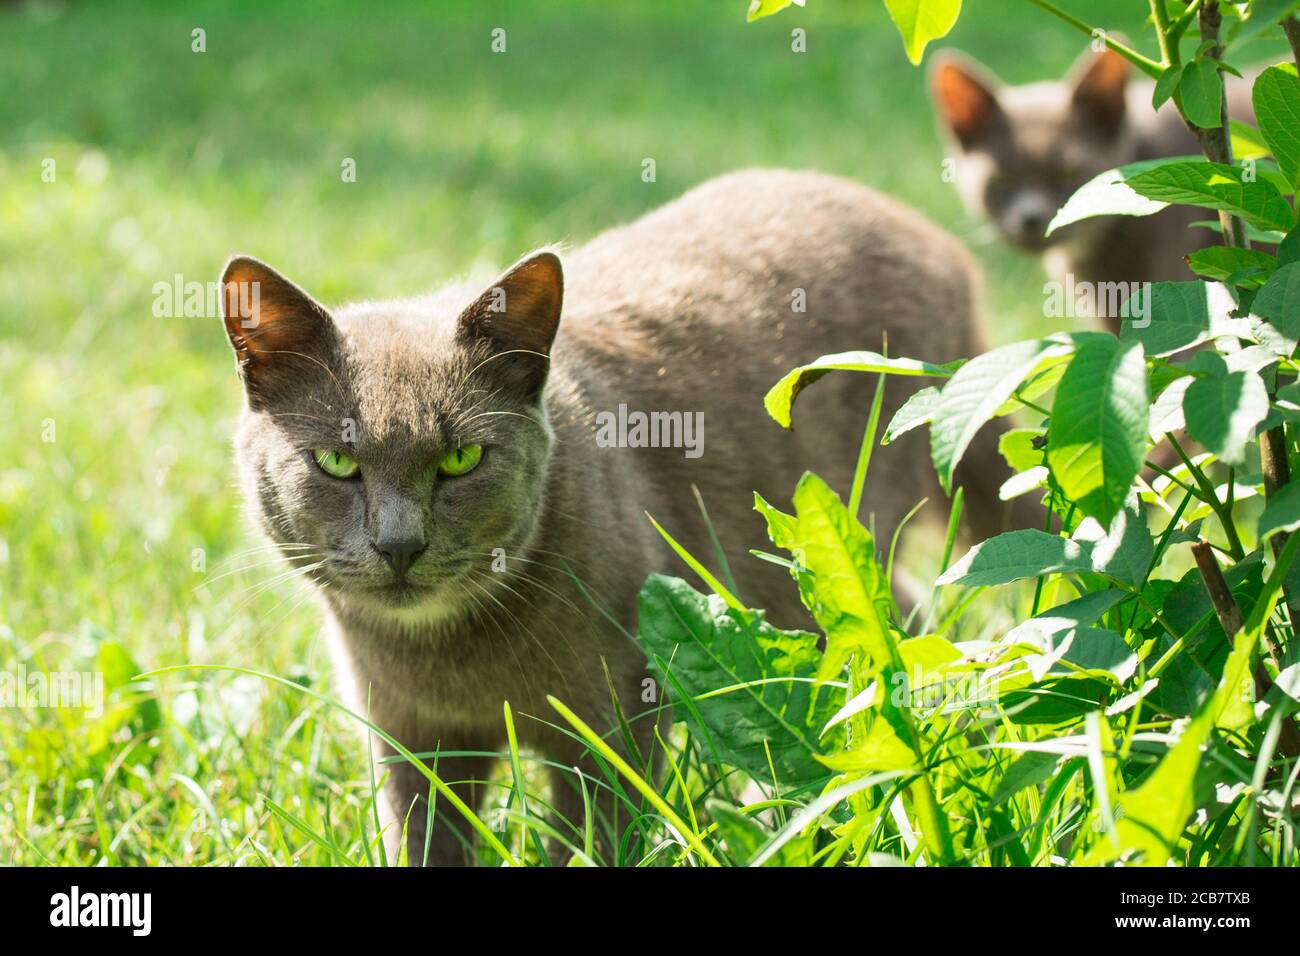 ravenous gray cat with bright green eyes peeking out from behind a bush on a blurred background of the second Stock Photo